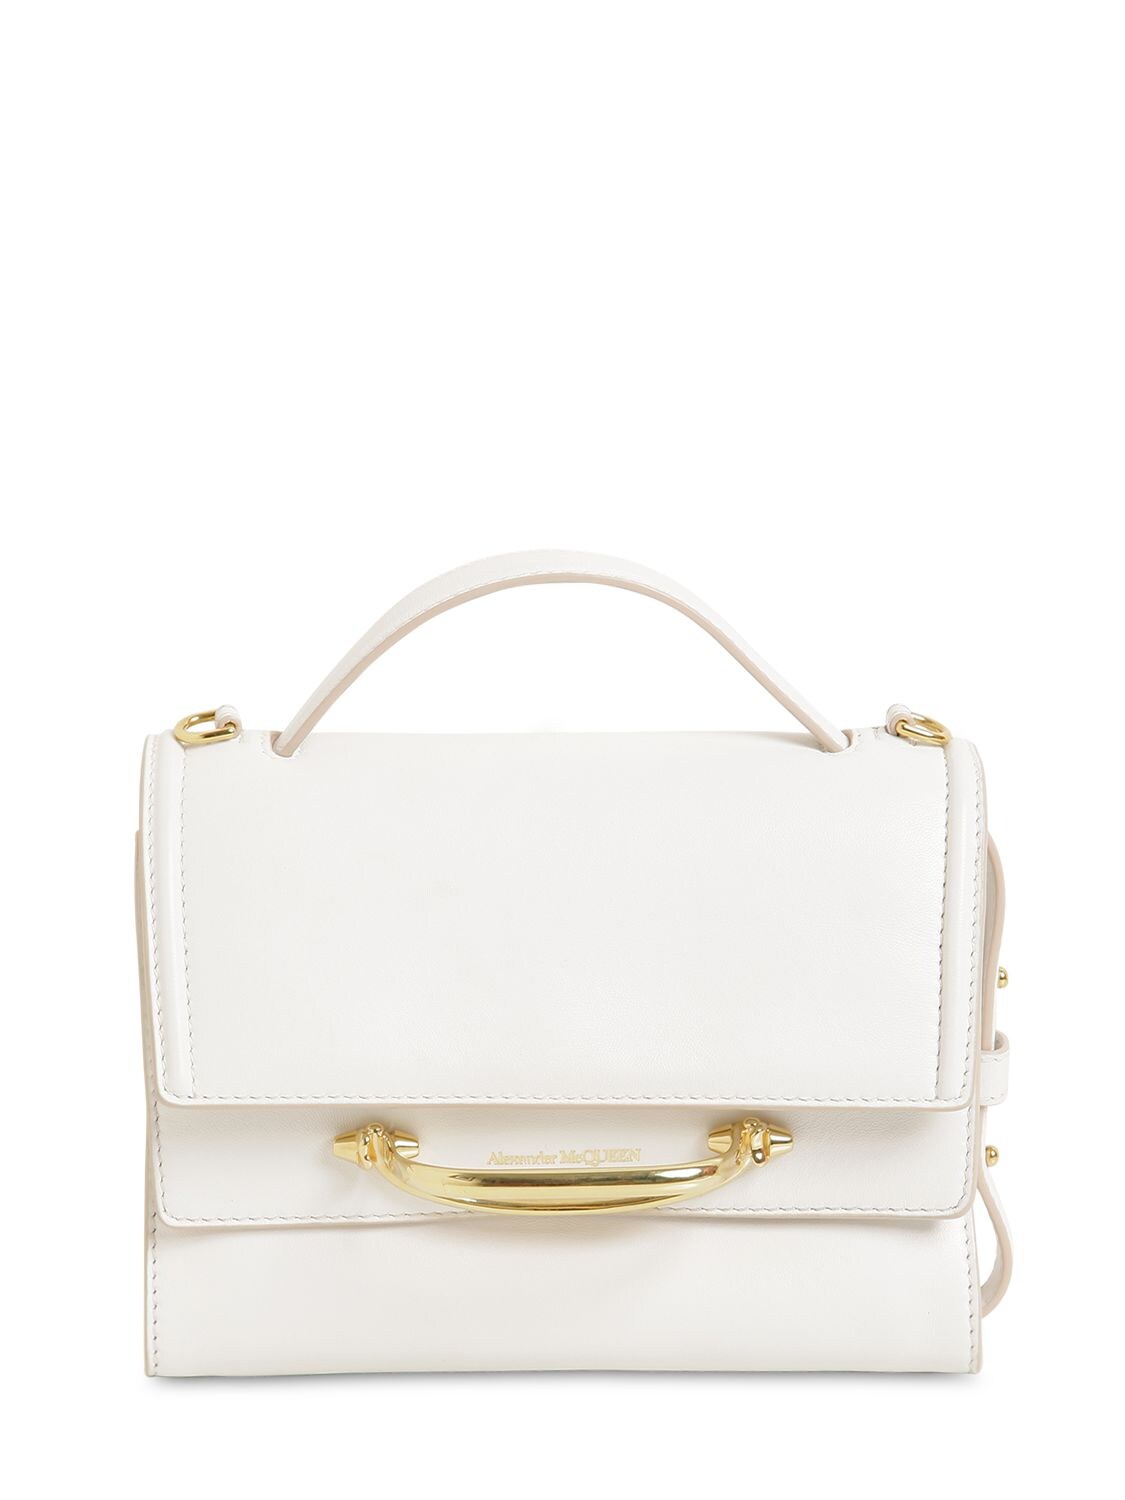 ALEXANDER MCQUEEN THE STORY LEATHER SHOULDER BAG,71IA8E002-OTAWNG2